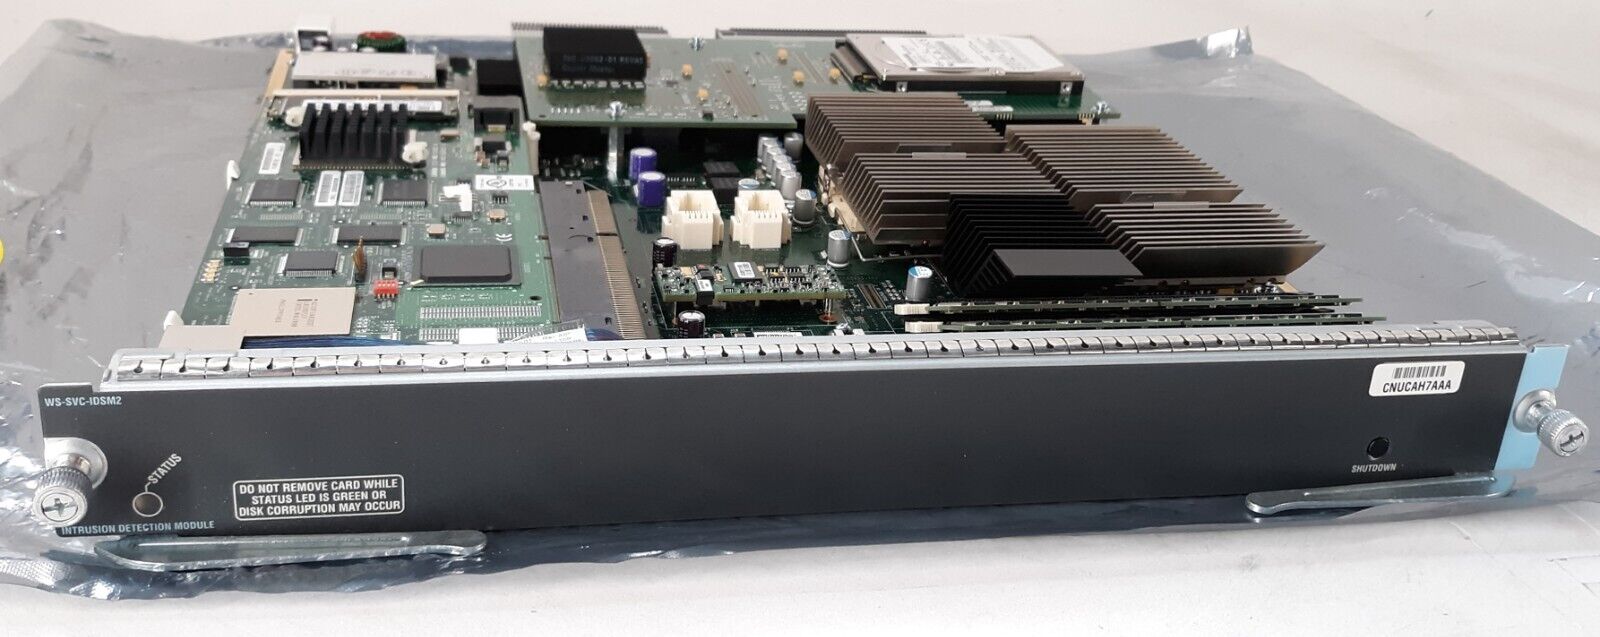 Cisco WS-SVC-IDSM-2 V06 Intrusion Detection System Module *PULLED*